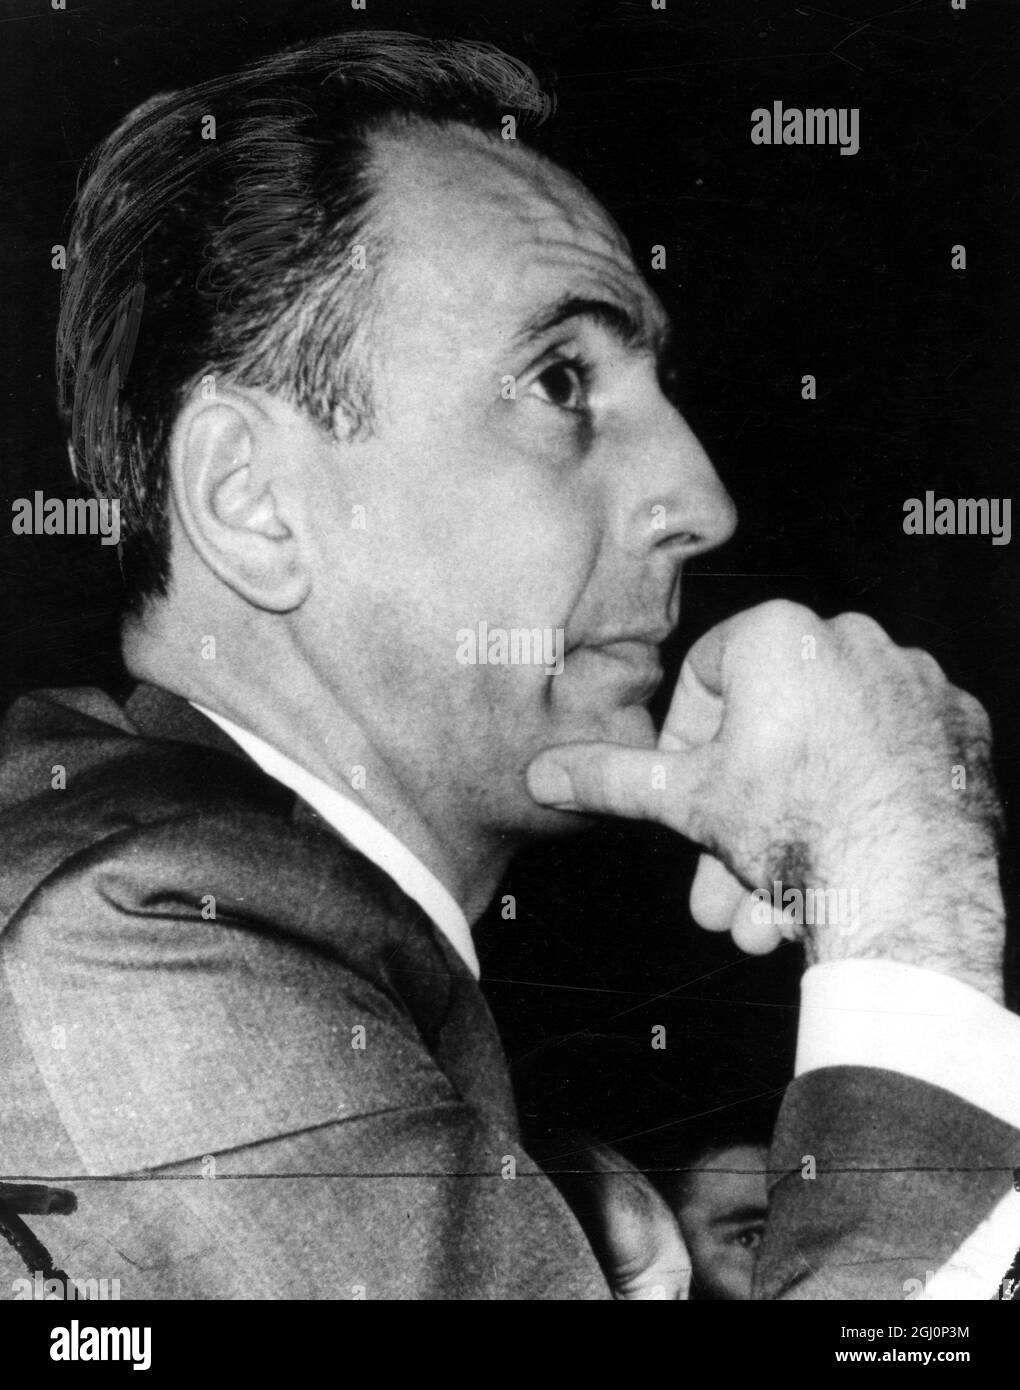 Profile portrait of Robert ' Bob ' Cousy , former American professional basketball player Stock Photo